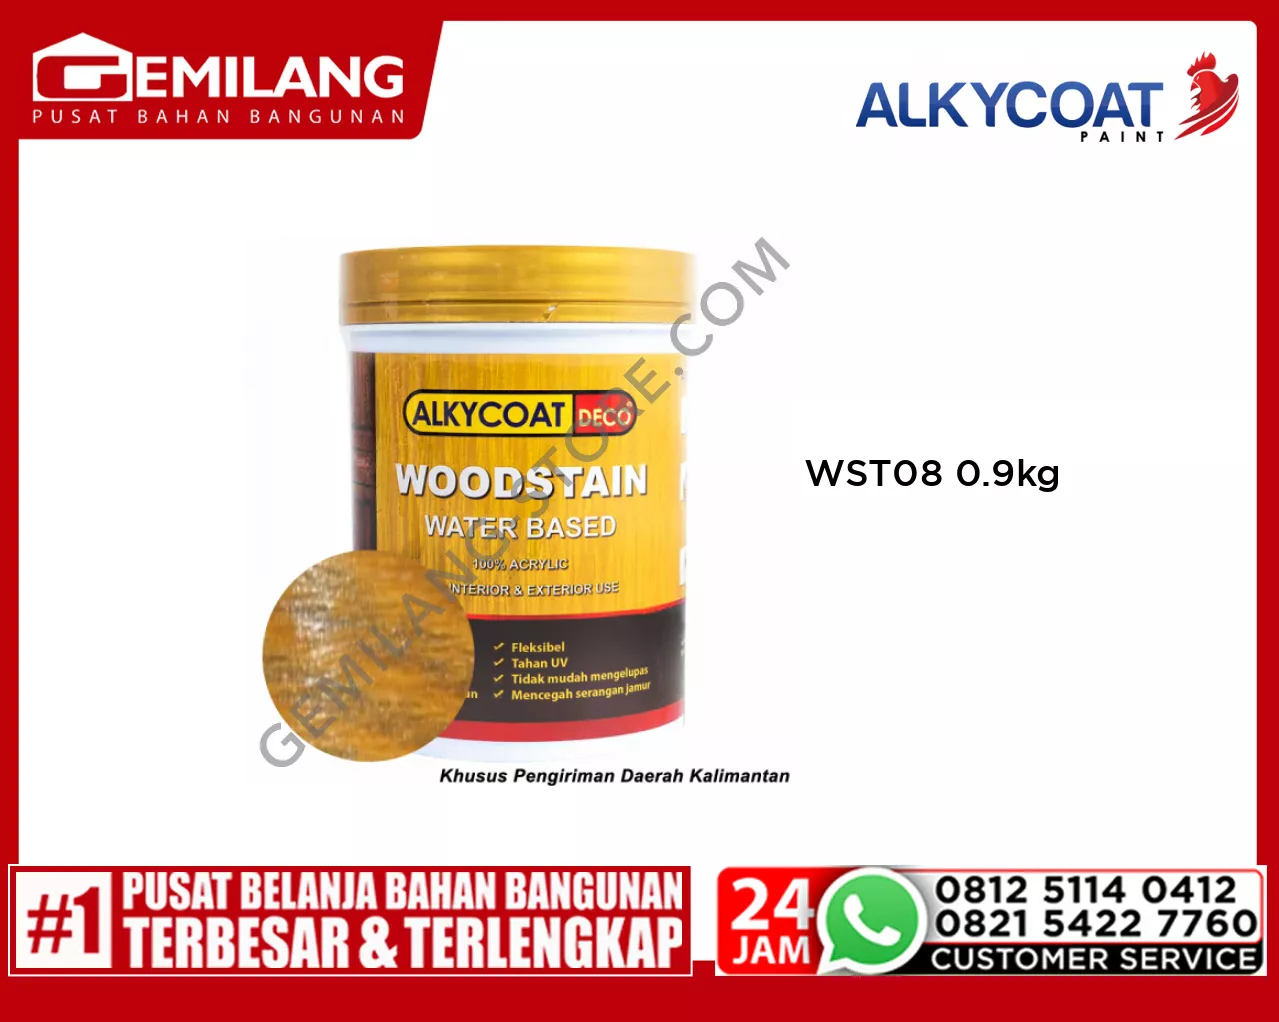 NEO ALKYCOAT DECO WOODSTAIN WST08 EXPRESSO 0.9kg